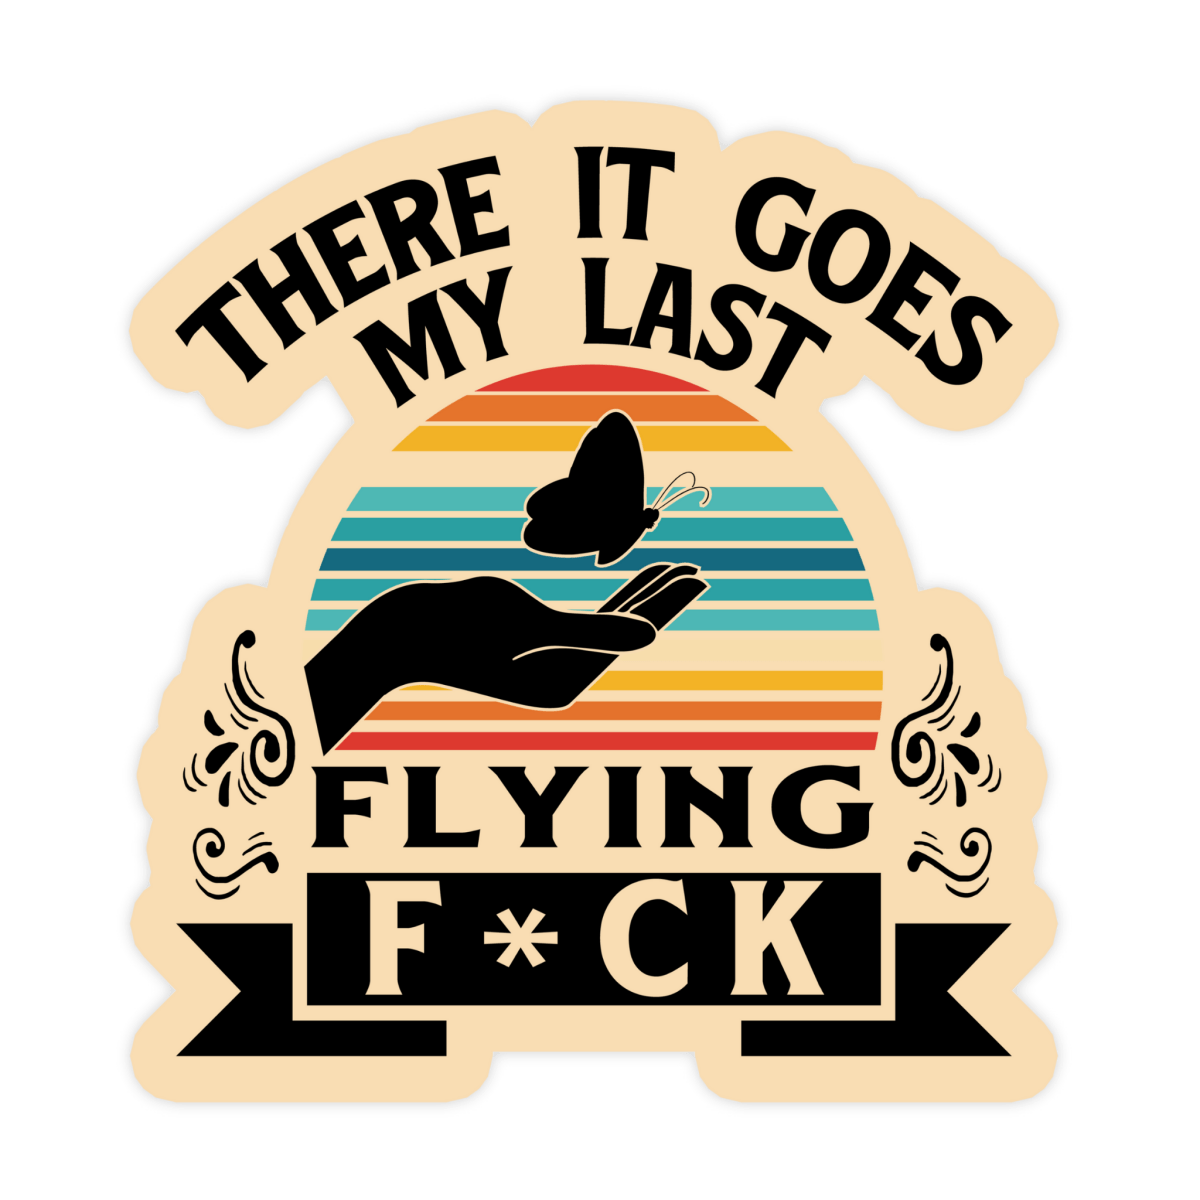 There Goes My Last Flying Fuck Butterfly Sticker - stickerbullThere Goes My Last Flying Fuck Butterfly StickerRetail StickerstickerbullstickerbullTaylor_LastFuckTan sticker with butterfly and text saying there it goes my last flying fuck